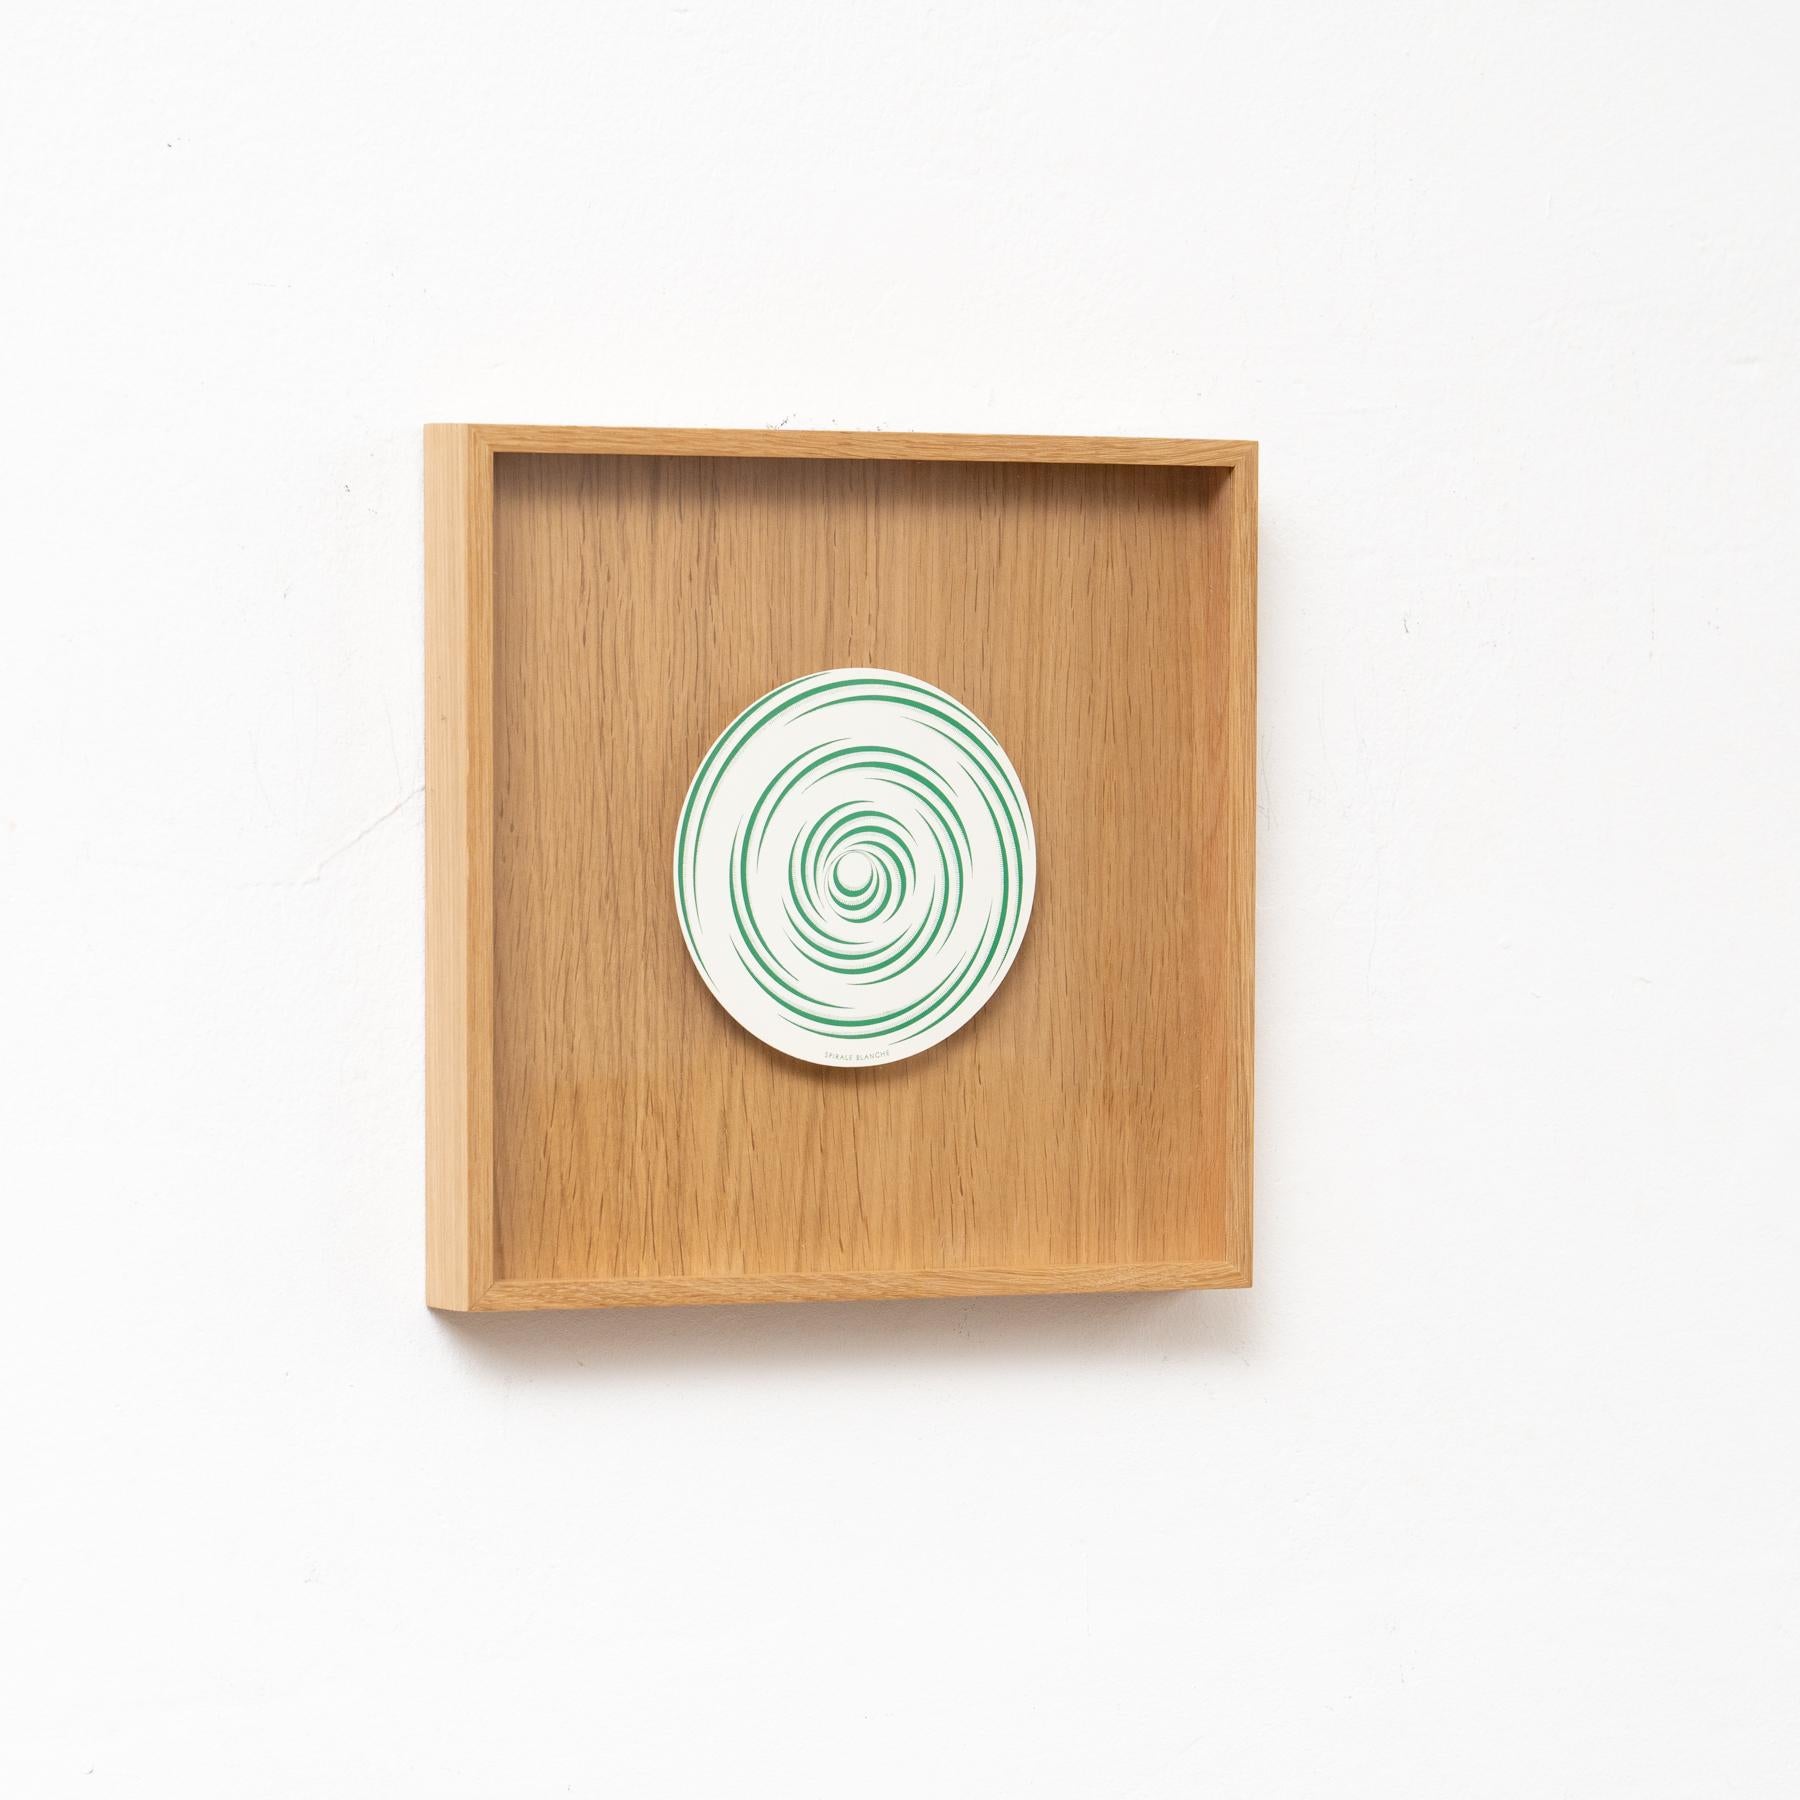 French Marcel Duchamp Green White Spirale Blanche Rotorelief by Konig Series 133, 1987 For Sale